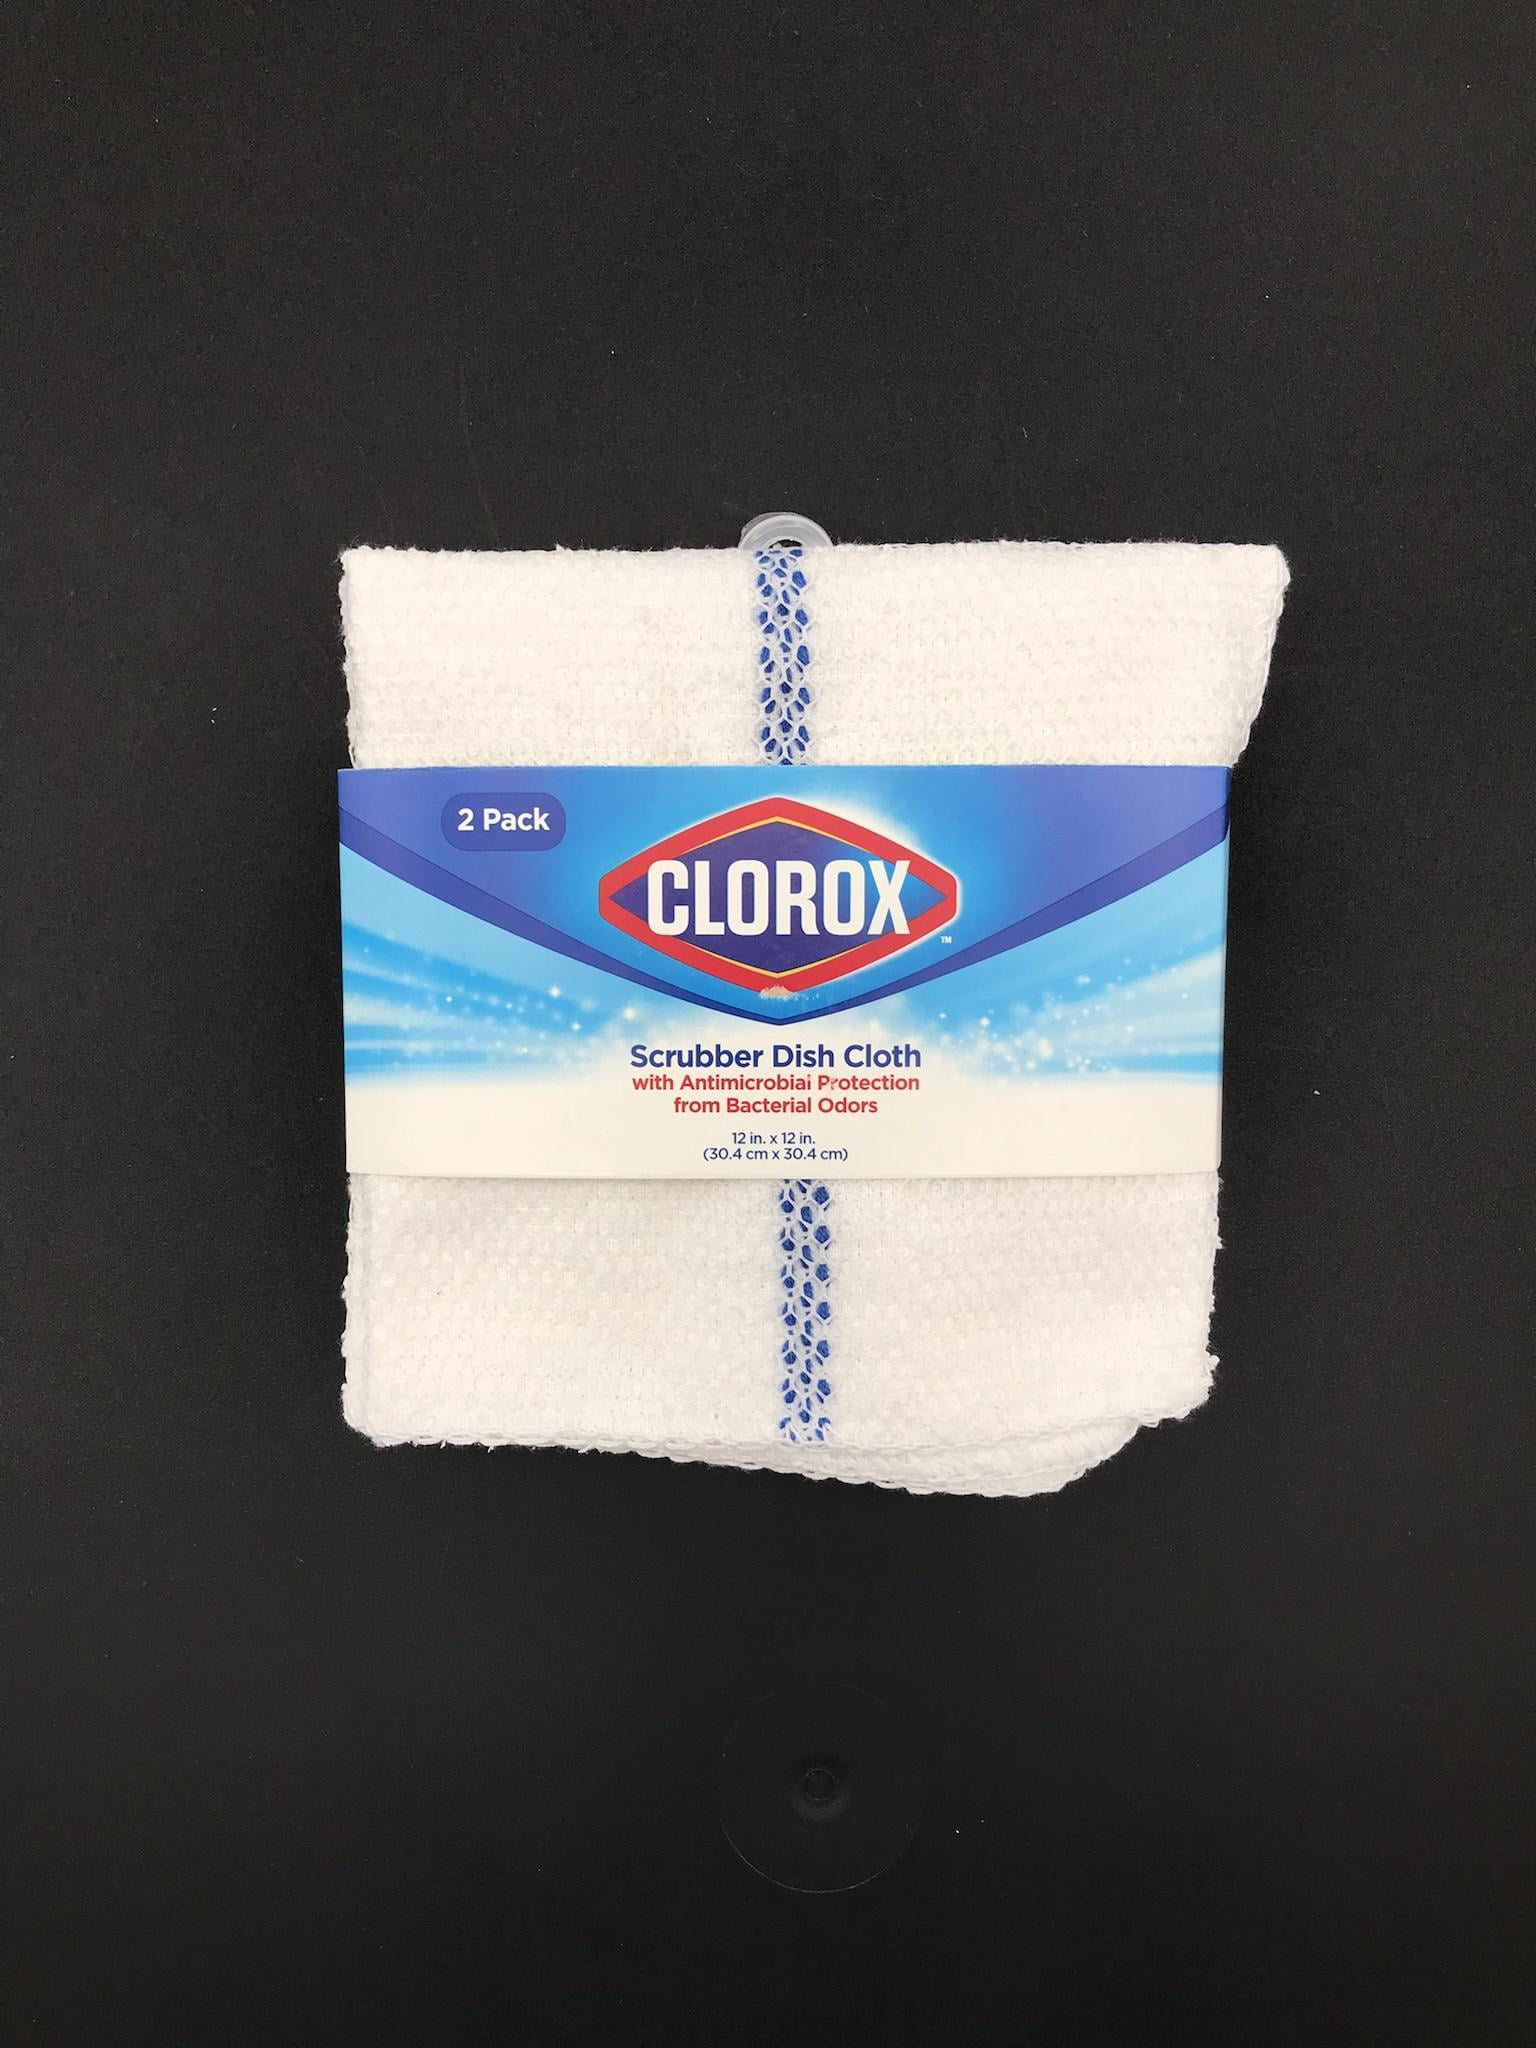 CLOROX 2 pack Scrubber Dish Cloth 12 x 12 Gray Stripe Antimicrobial  Protection